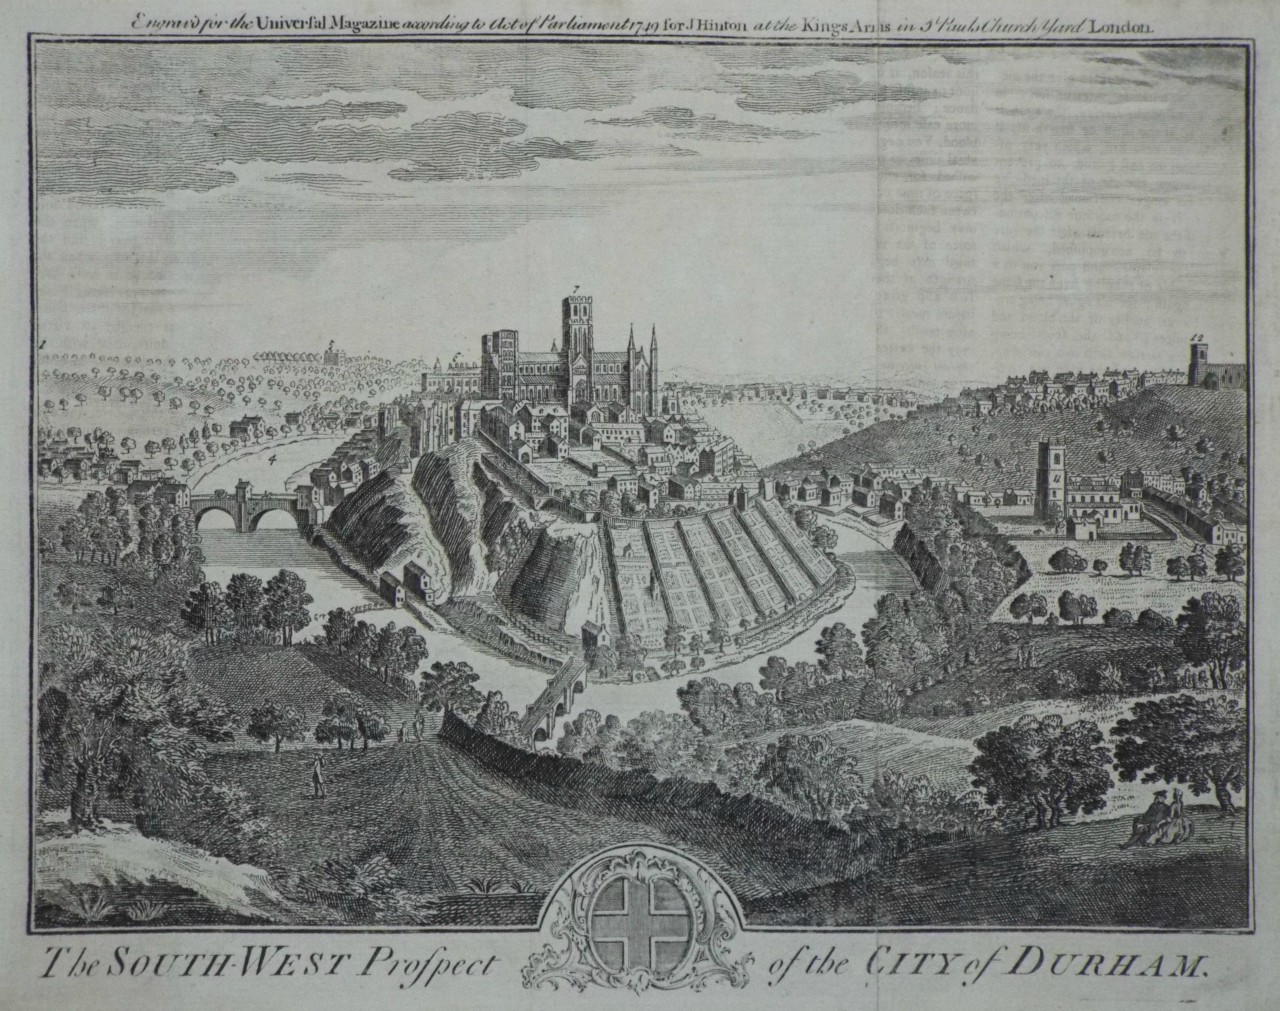 Print - The South-West Prospect of the City of Durham.